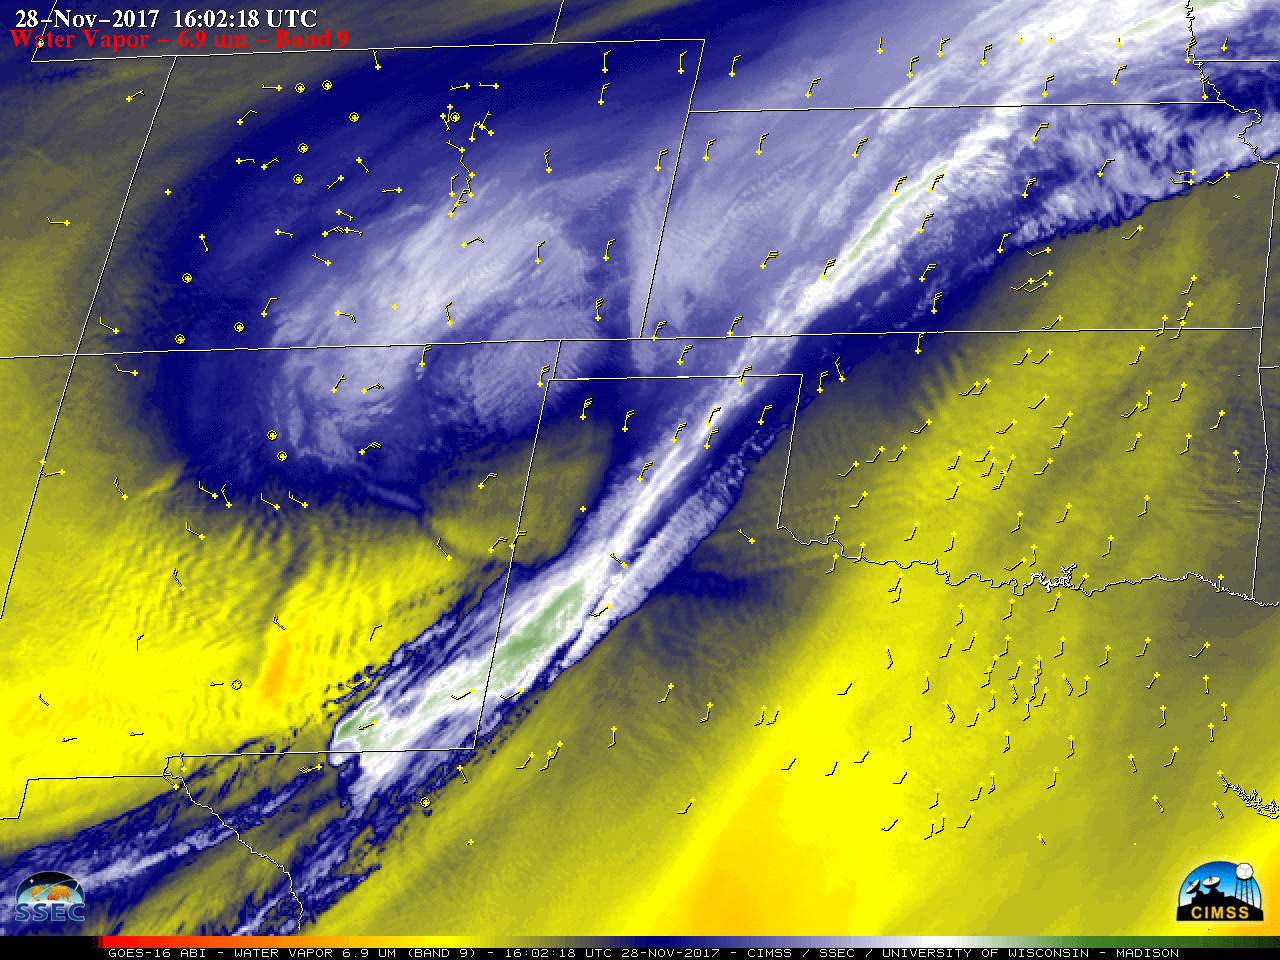 GOES-16 Mid-level (6.9 µm) images, with hourly surface wind barbs plotted in yellow [click to play MP4 animation]